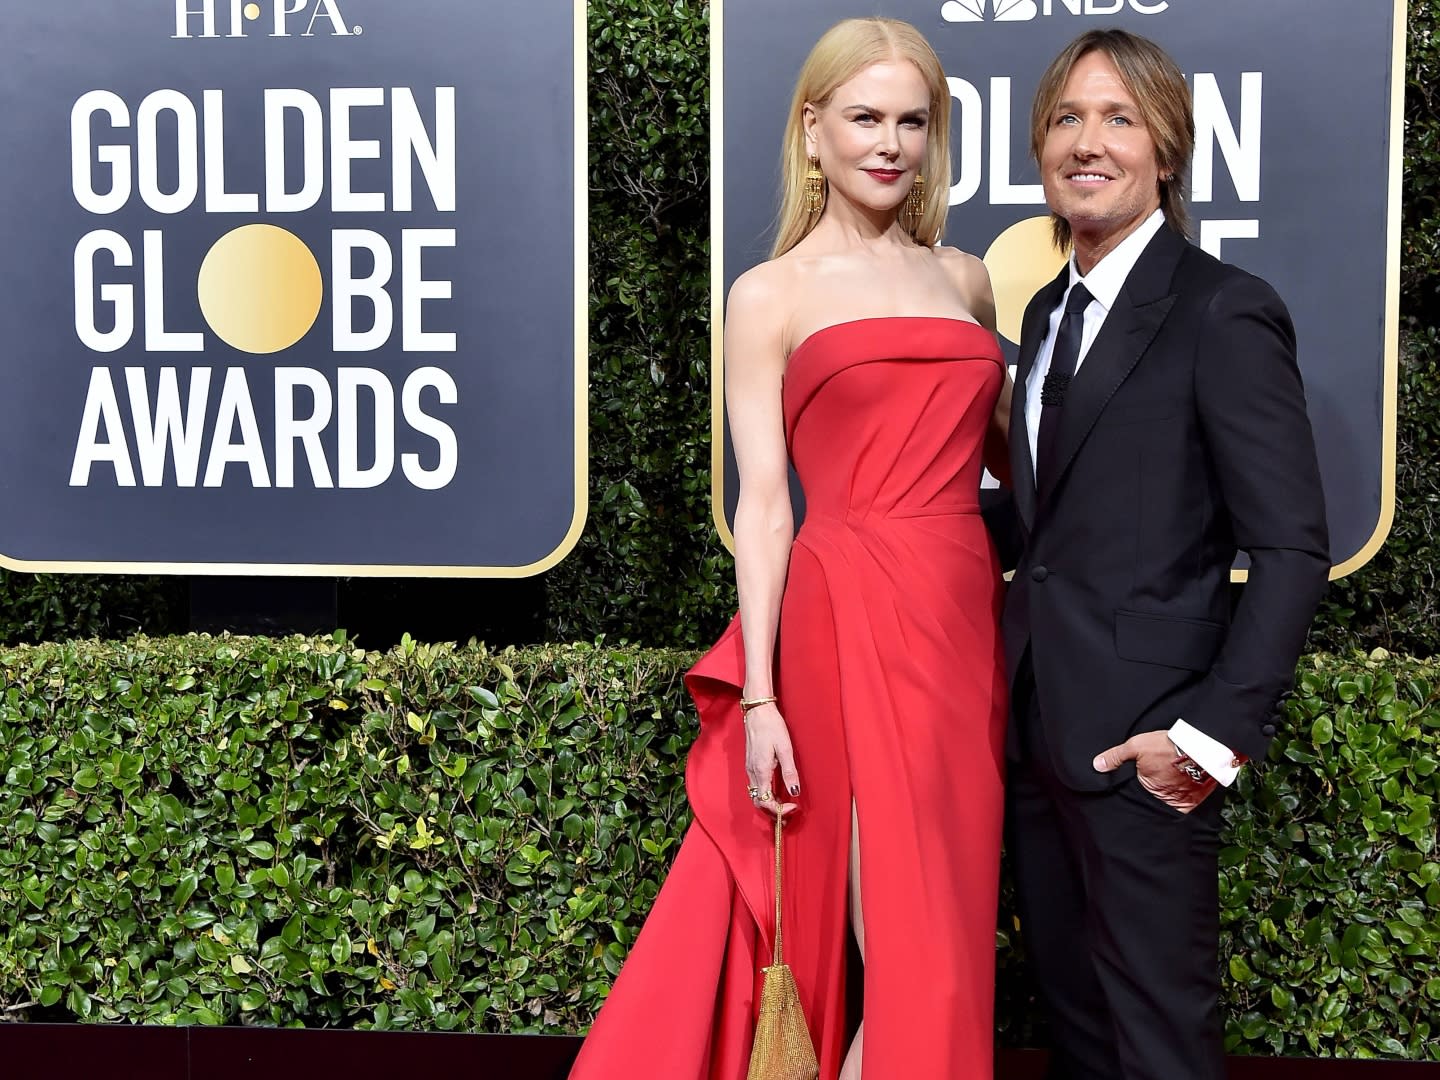 Keith Urban wanted to “knock out” the man who “defeated” Nicole Kidman at the opera